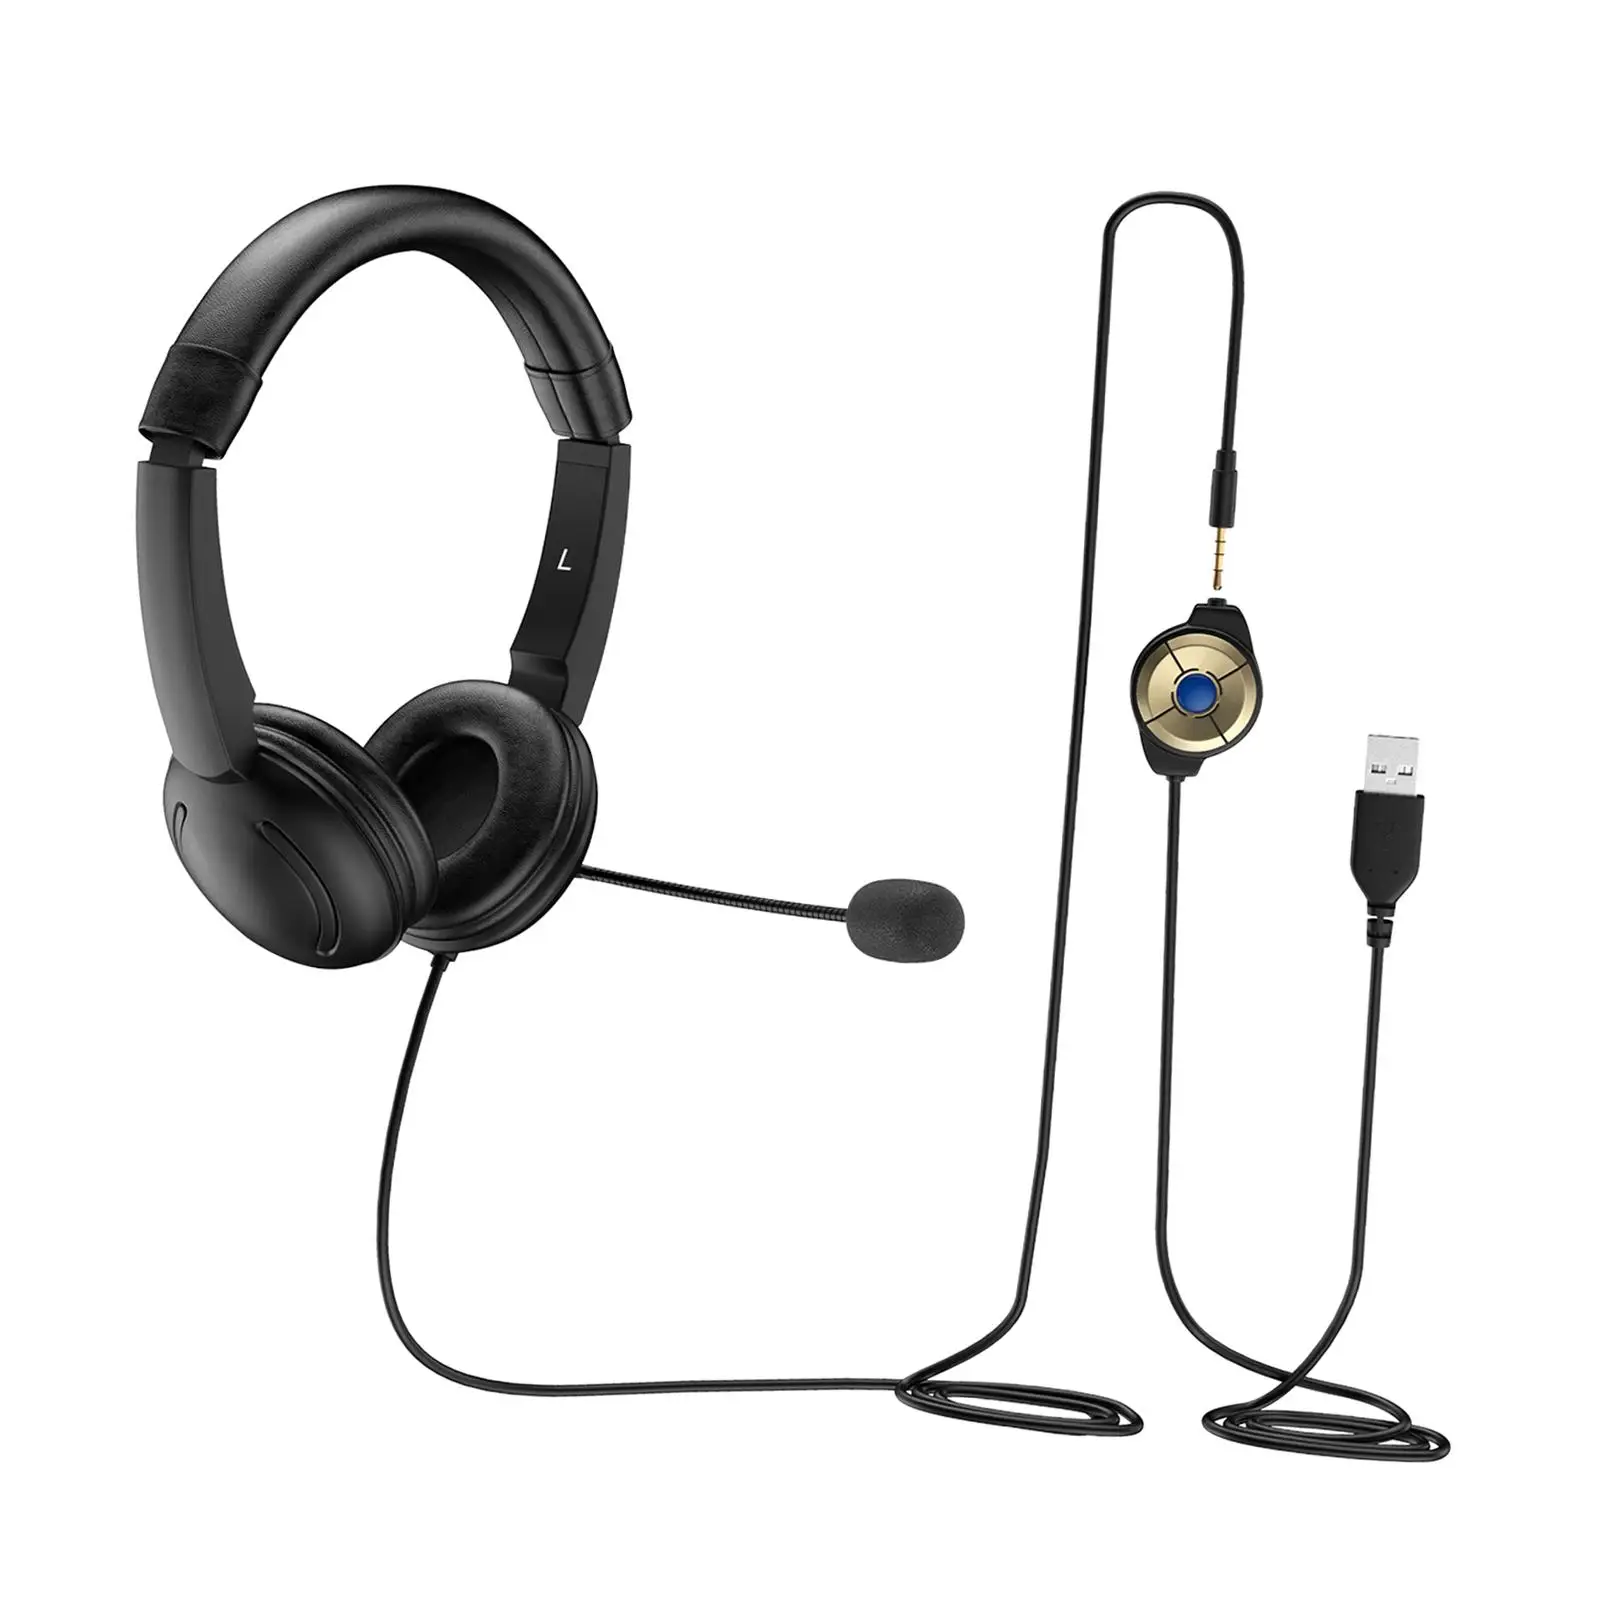 USB Wired Headset Comfortable Lightweight Volume Control Comfort Computer Headset for Video Meetings Office Call Center PC Music